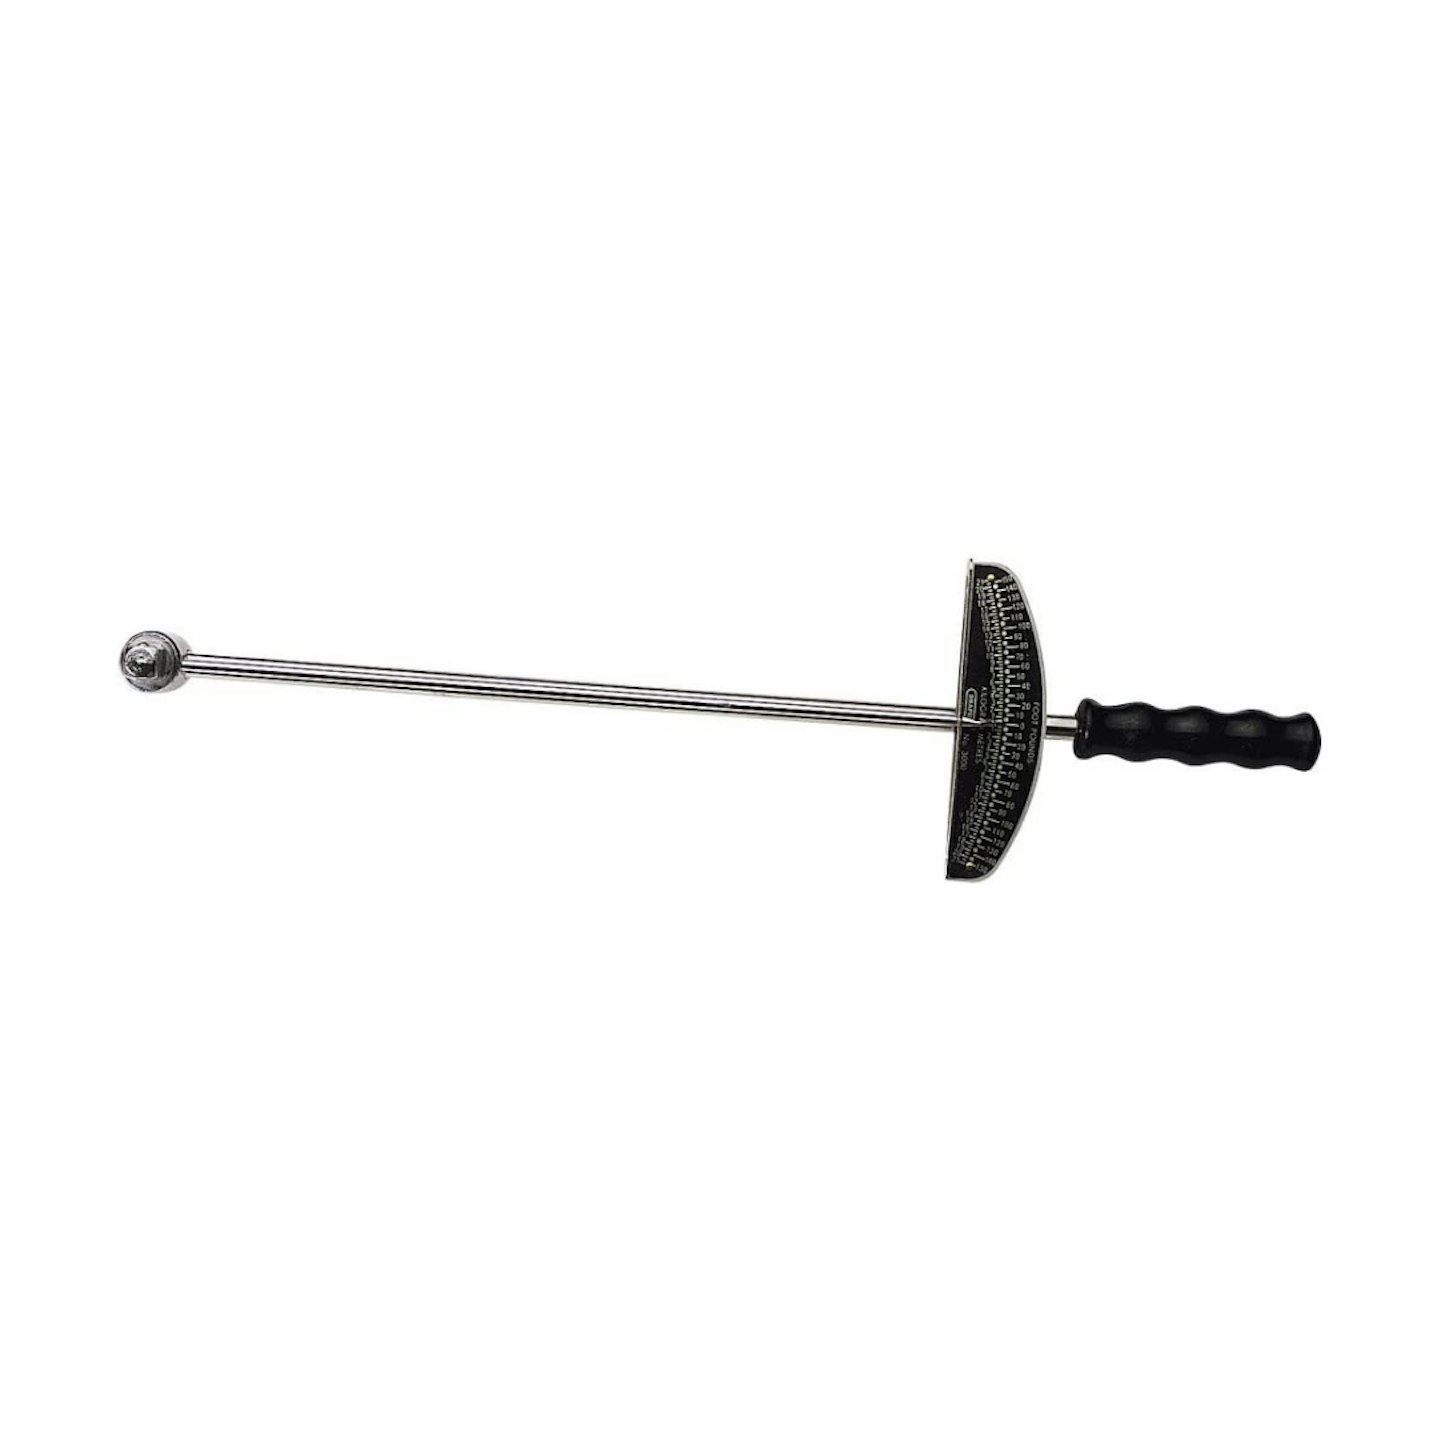 Draper 34487 Powerset Torque Wrench, 1/2" Square Drive, 0-21Kg/M Or 0-150Lb-Ft, 460mm